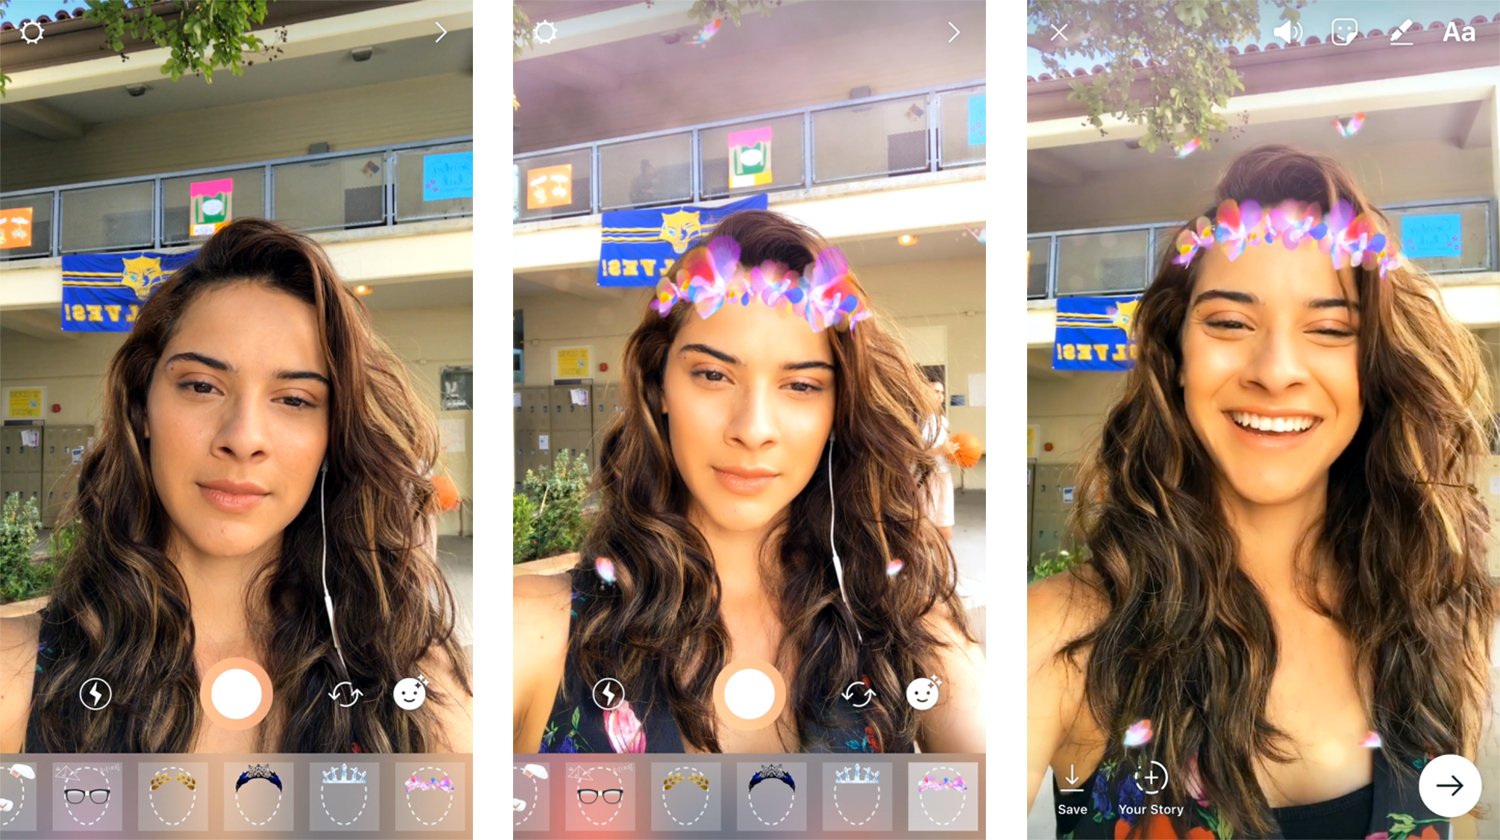  instagram copies snapchat again launches its own face 